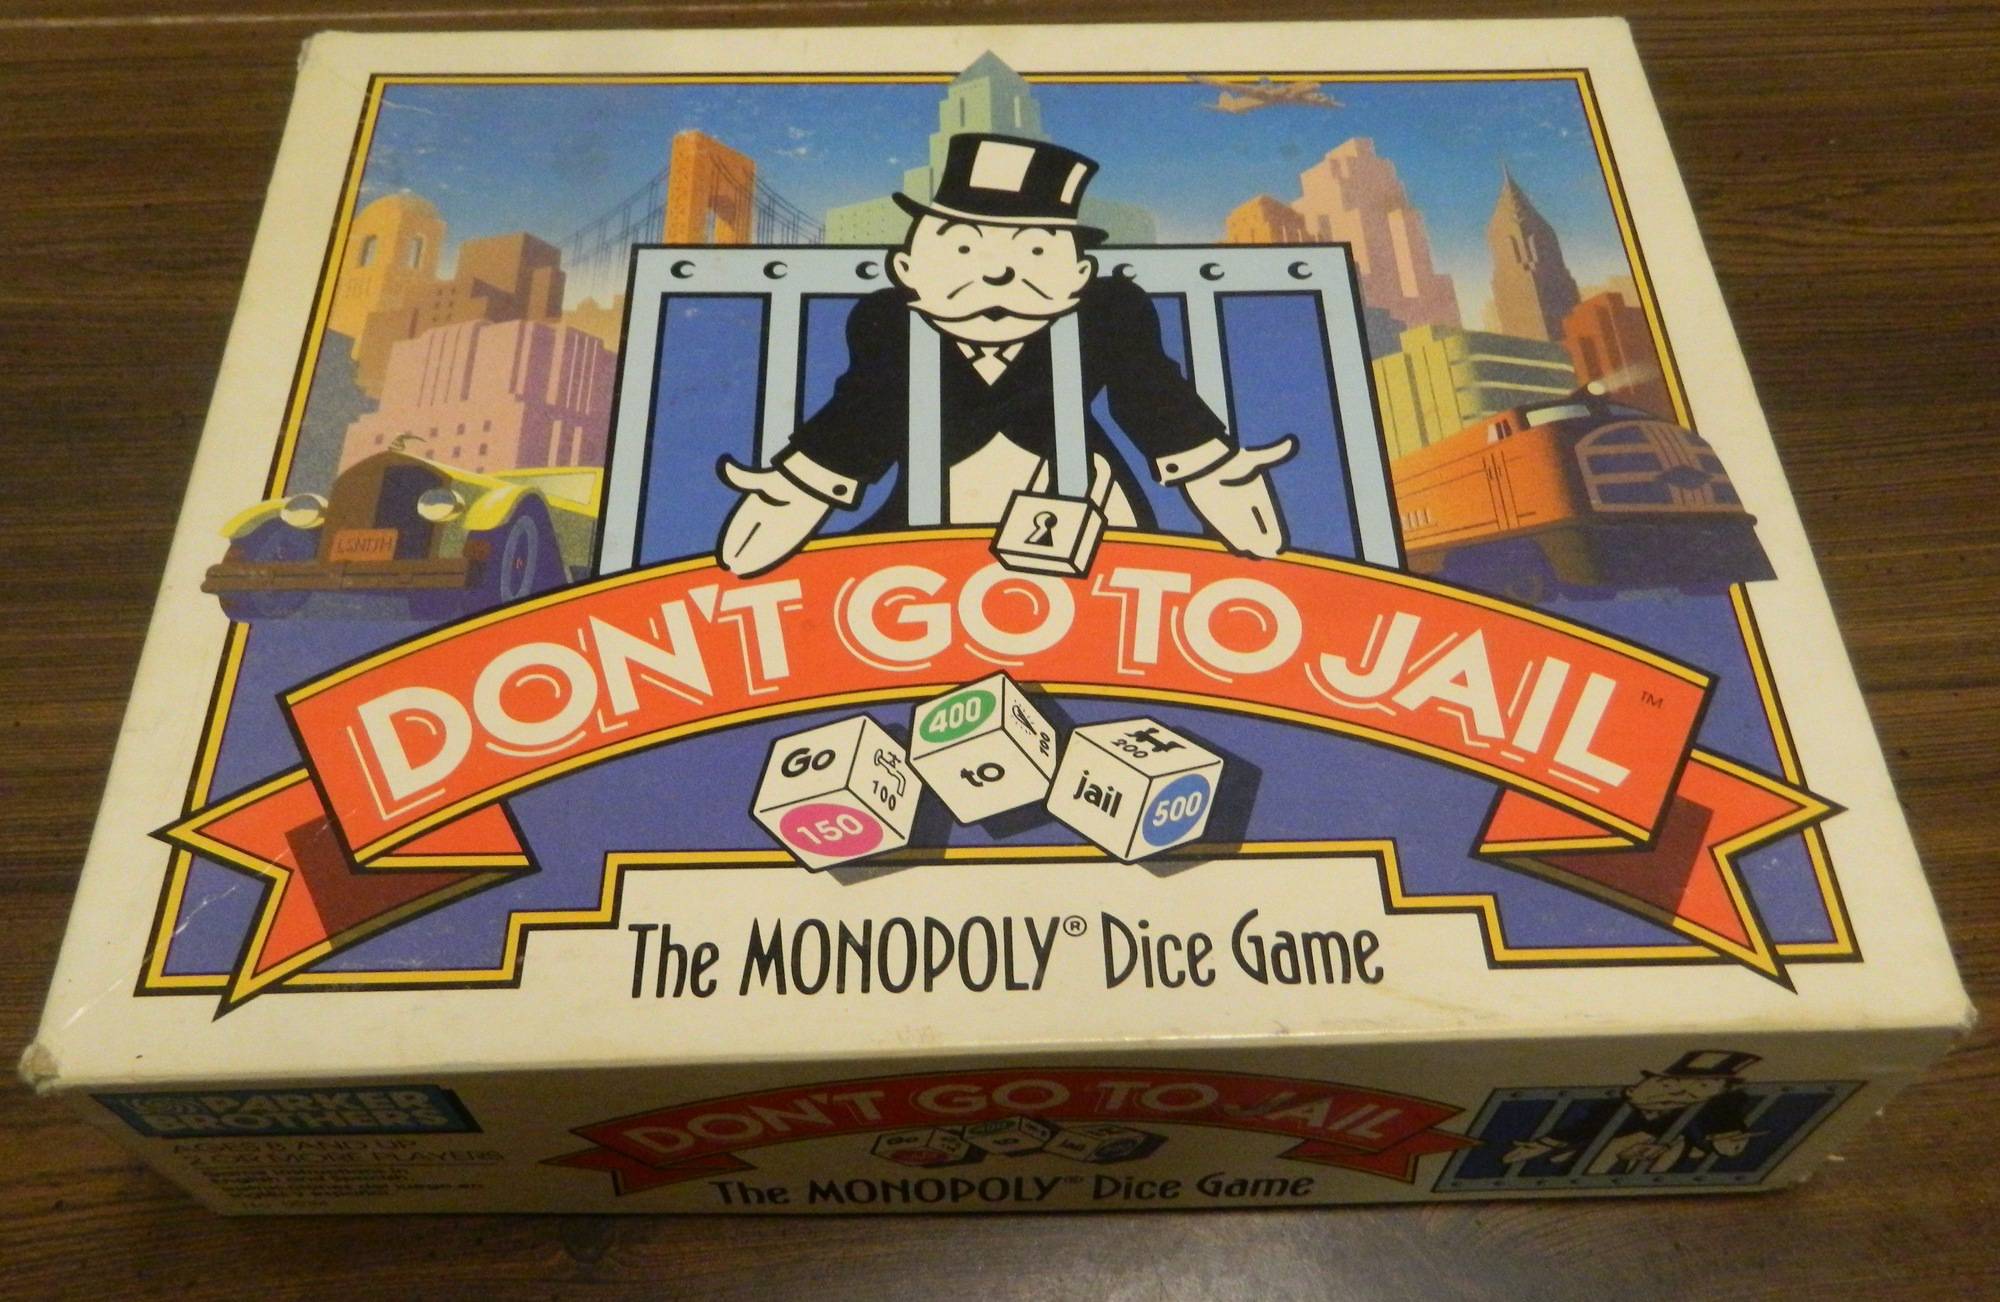 Don’t Go to Jail AKA Monopoly Express Dice Game Review and Rules